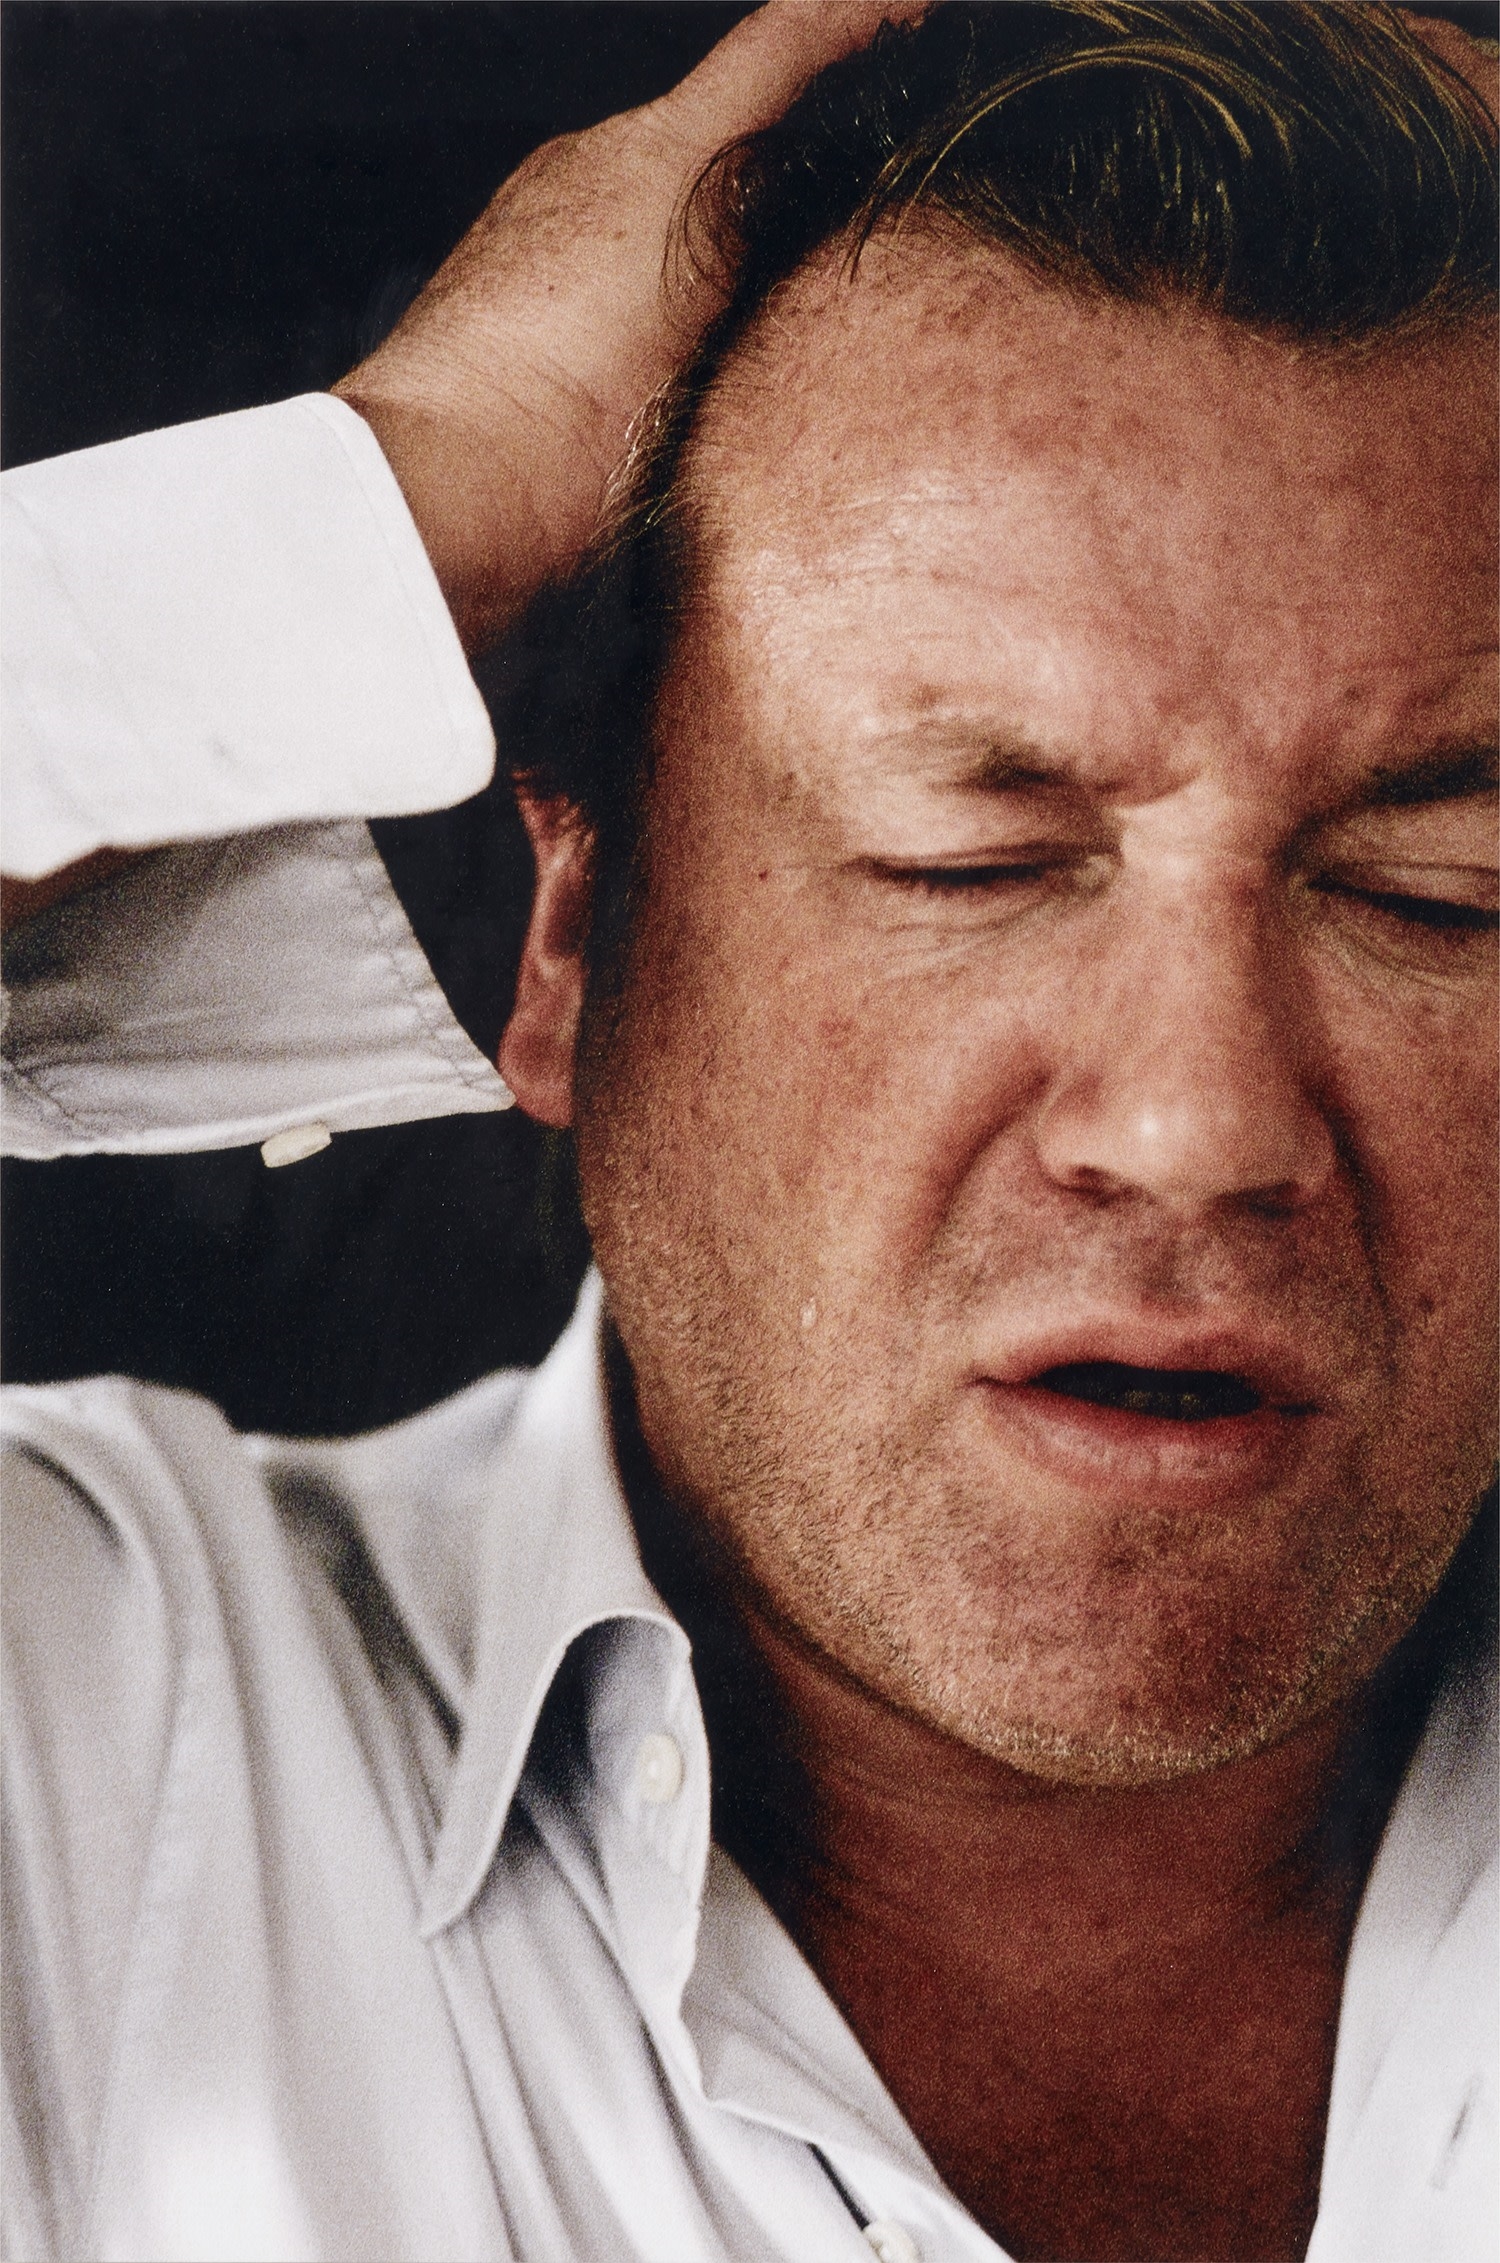 Artwork by Sam Taylor-Wood, Ray Winstone from Crying Men, Made of Chromogenic print.